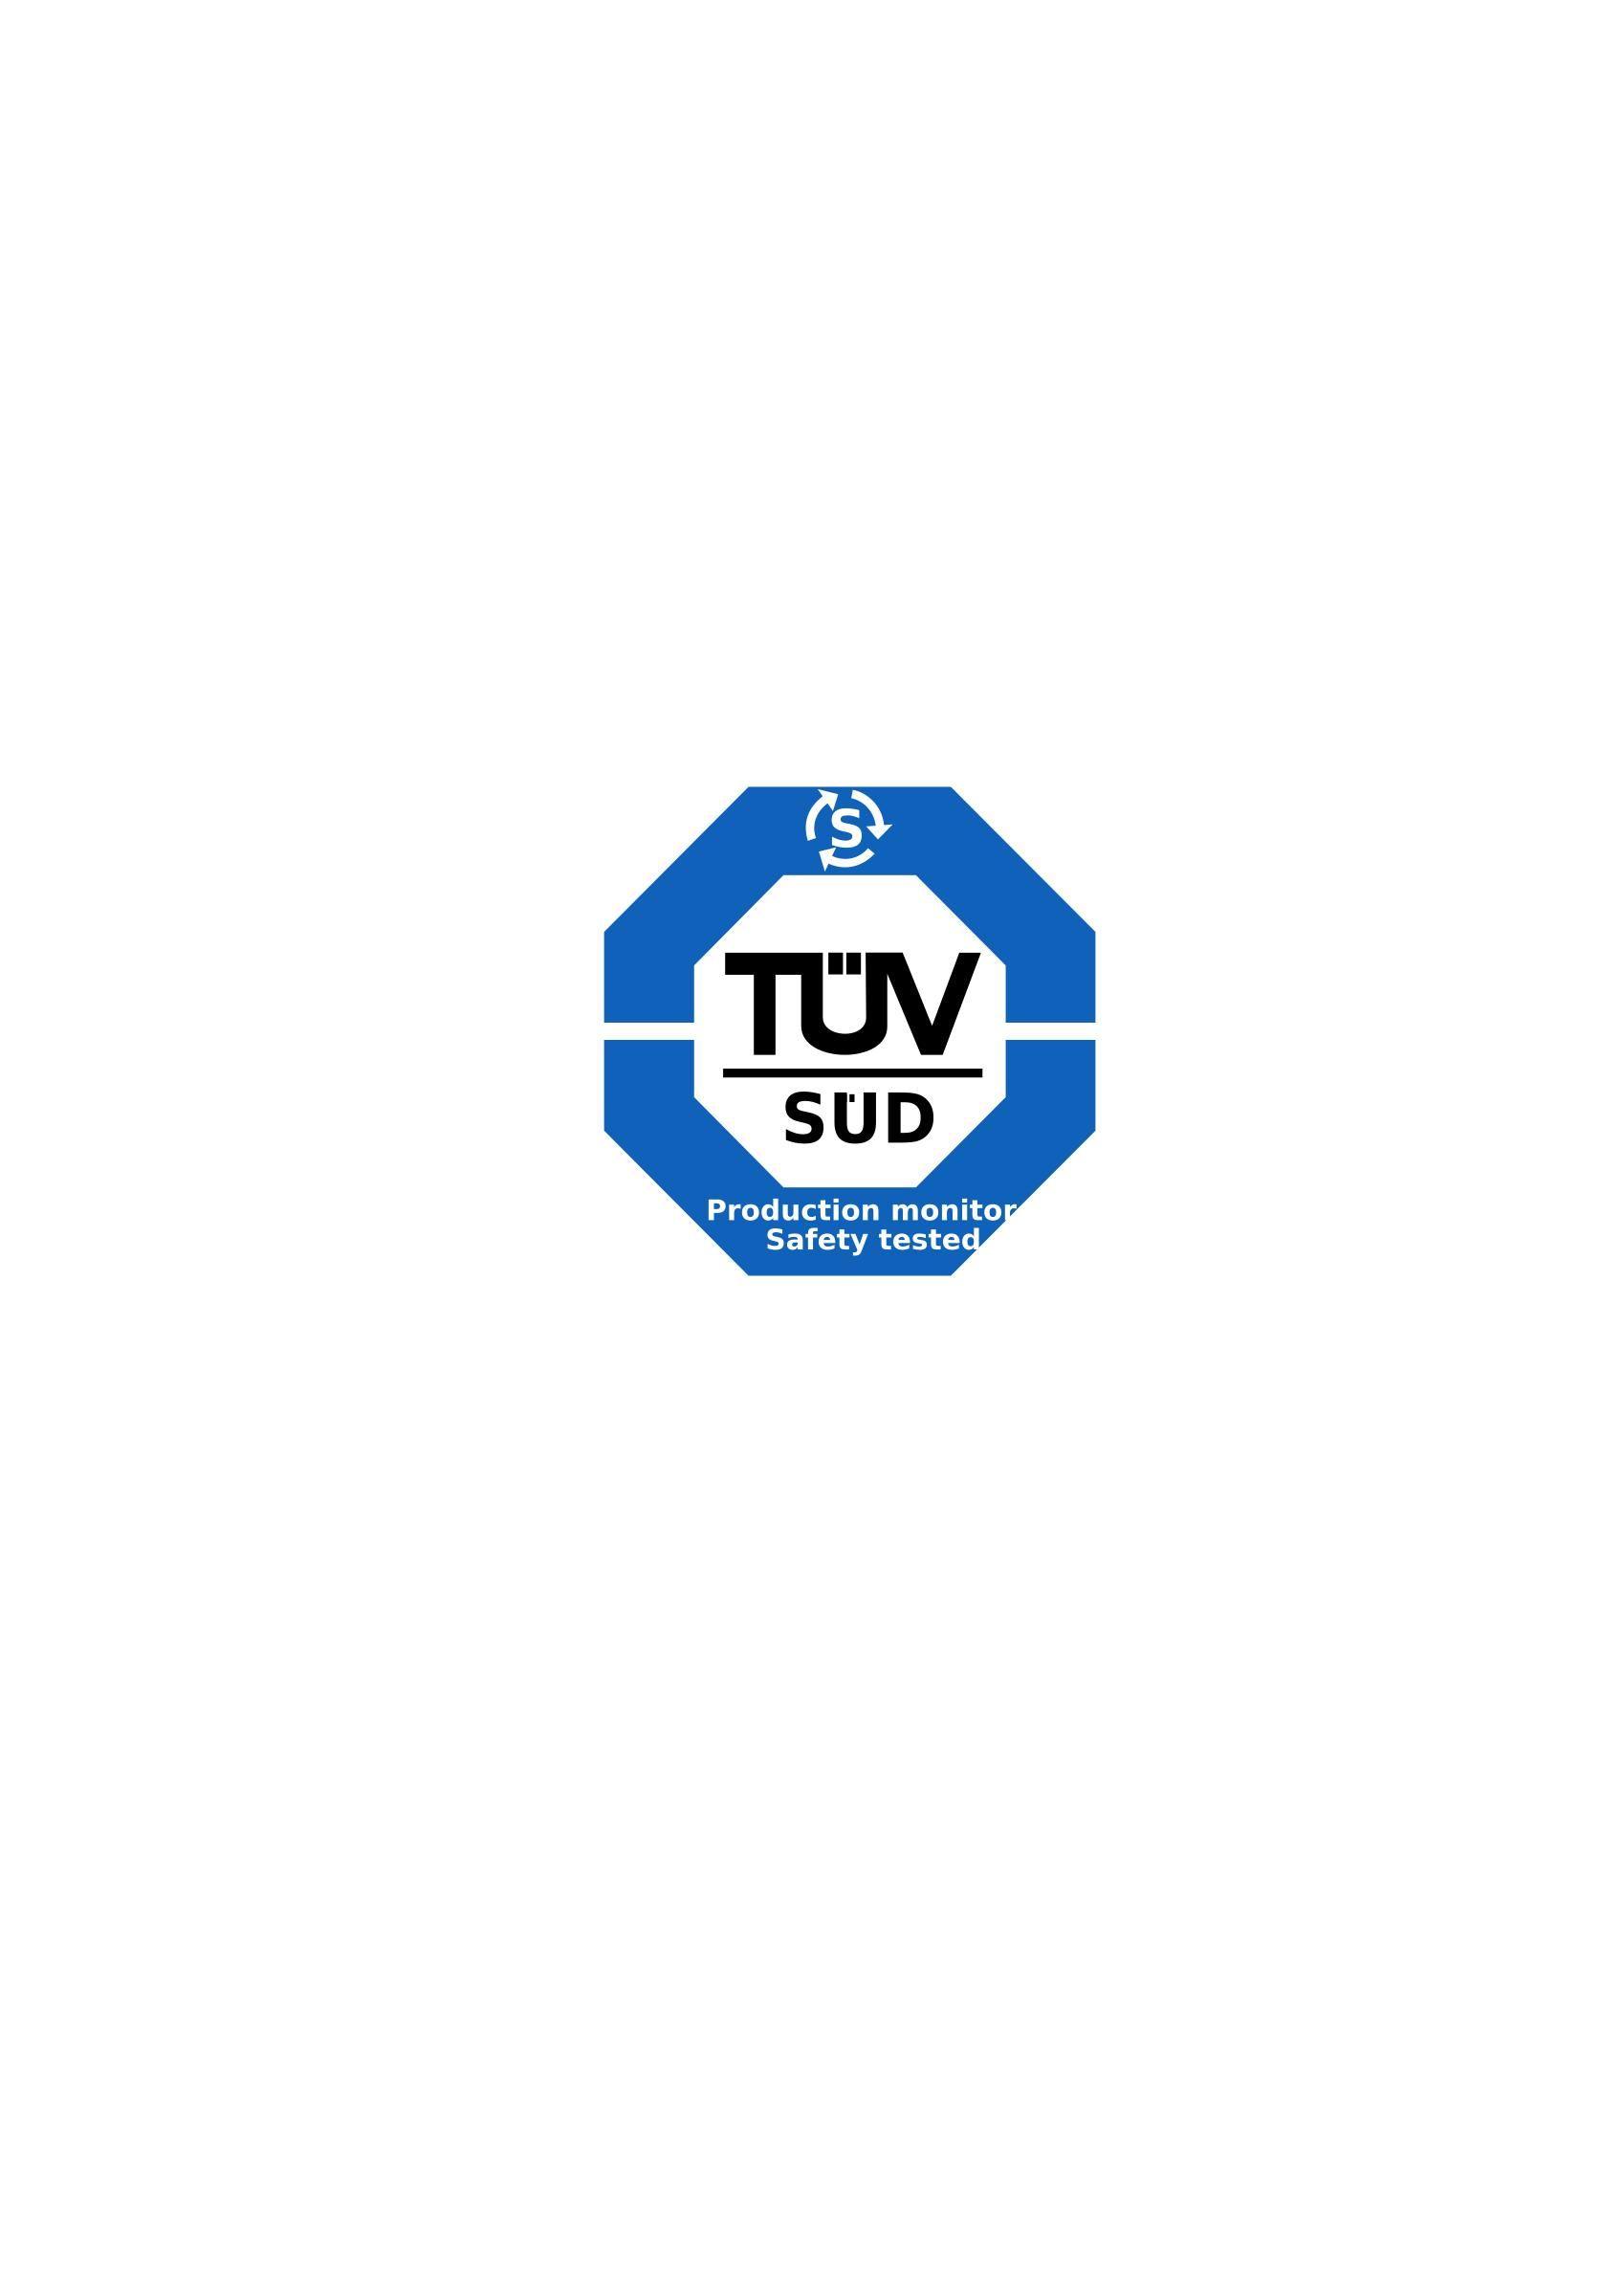 Tuv Logo - TUV SUD logo Icons PNG - Free PNG and Icons Downloads